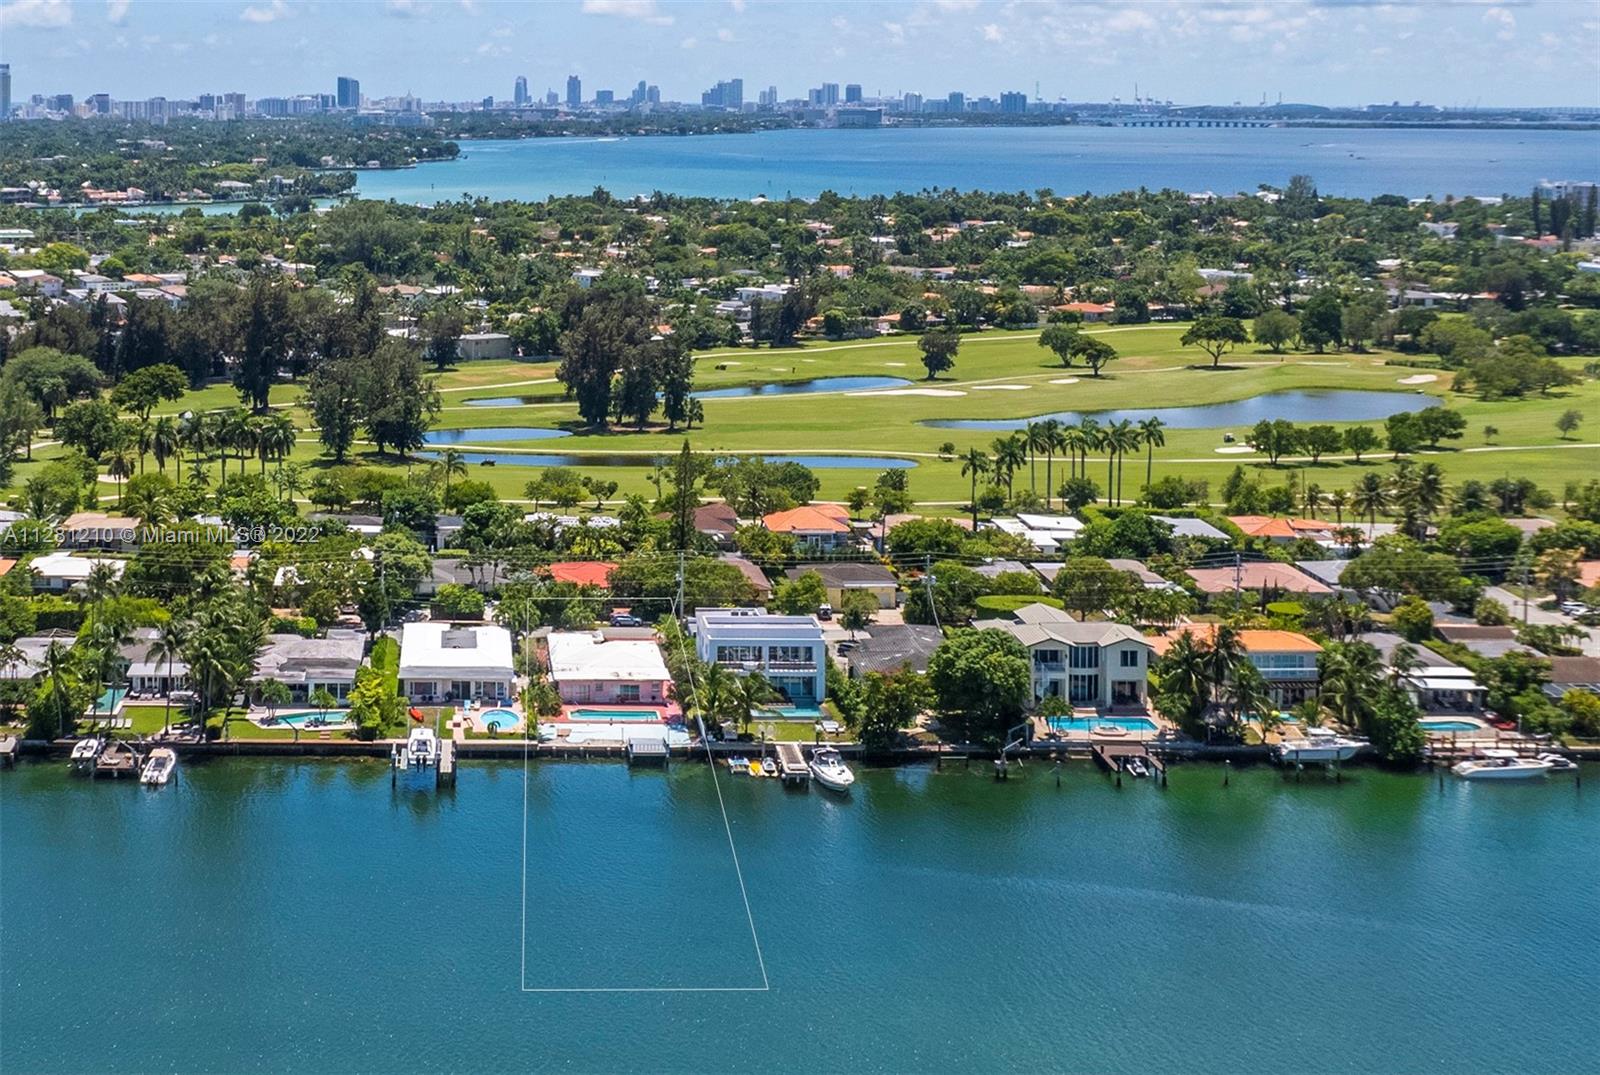 Build your waterfront dream home in the exclusive golf-gated community of Normandy Shores. Located just 15’ from Bal Harbour, South Beach & Wynwood, this location has become one of the most desirable waterfront luxury living spots in Miami Beach. 10,200 SQFT lot w/ breathtaking water views & 60 ft of water frontage can accommodate a 5,000 SQFT, 2 story residence, w/5 bed, 5 bath, chef kitchen, family/media rooms, 2 car garage & more. Enjoy your private pool, secluded garden, summer kitchen & boat dock. LUXURY WATERFRONT LIVING AT ITS BEST. Rent the existing 2,394 SQFT, 3B/2B home while you create your masterpiece. PROJECT, ARCHITECTURAL PLANS & PERMITS ARE NOT INCLUDED. Renders are courtesy of H2 Construction, a Design, Build and Development firm with multiple developments in Normandy.